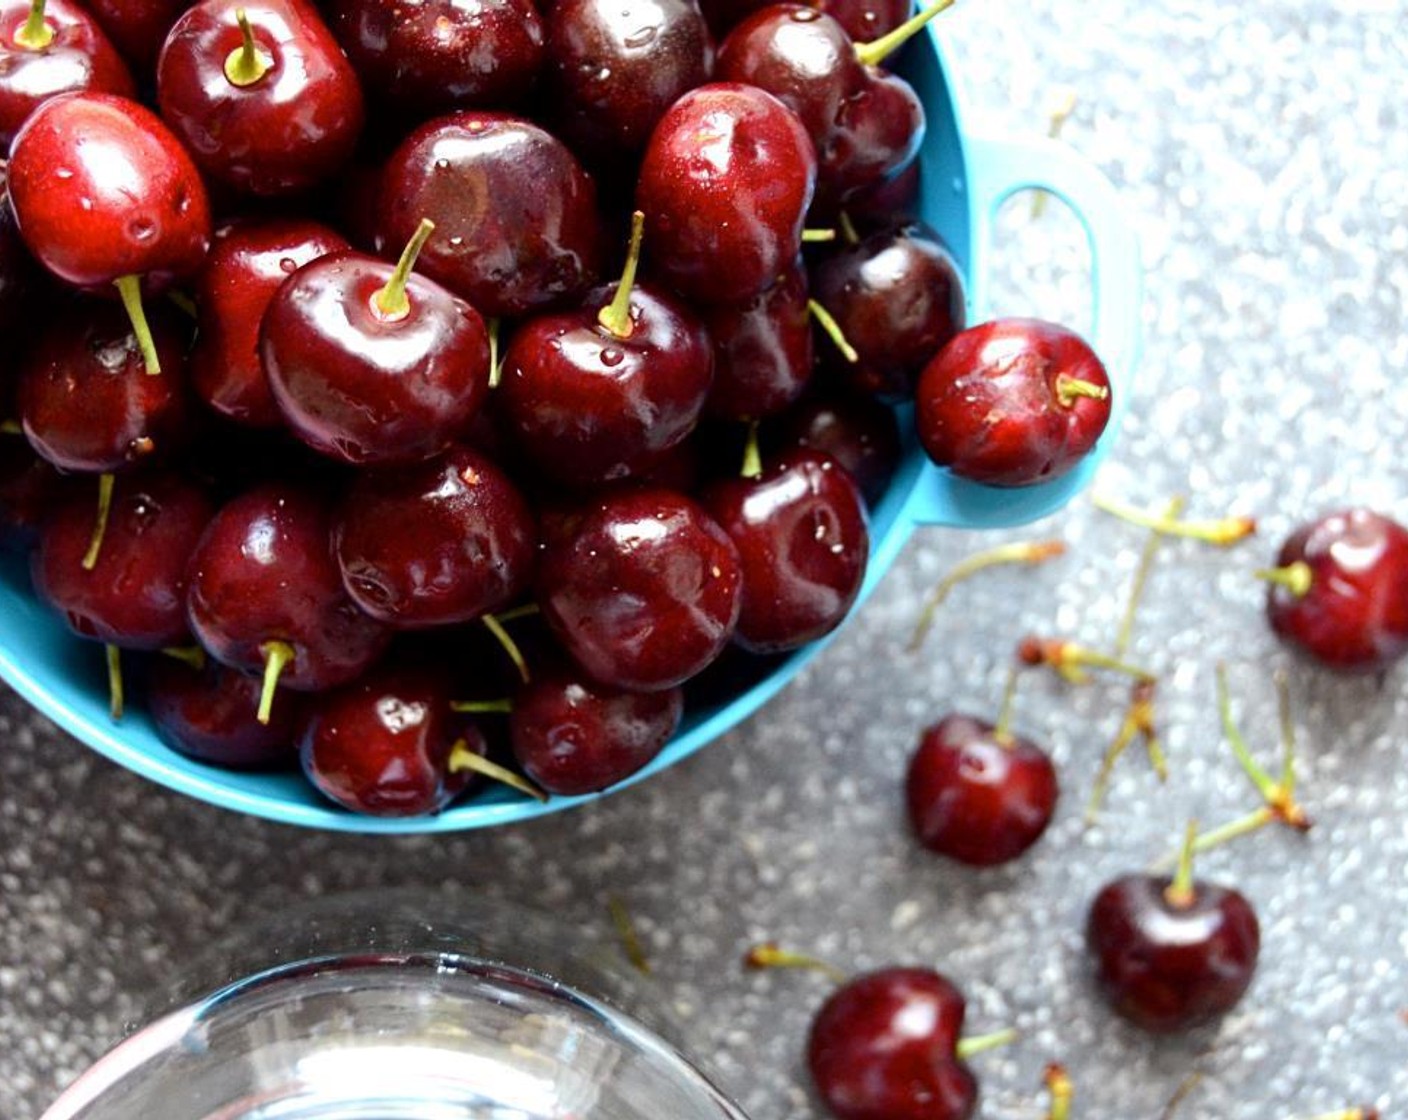 step 1 Rinse the Cherries (2 1/4 cups) and pick out any bruised or damaged fruit. Use a pair of kitchen sheers to trim the stems to about 1/2" long.